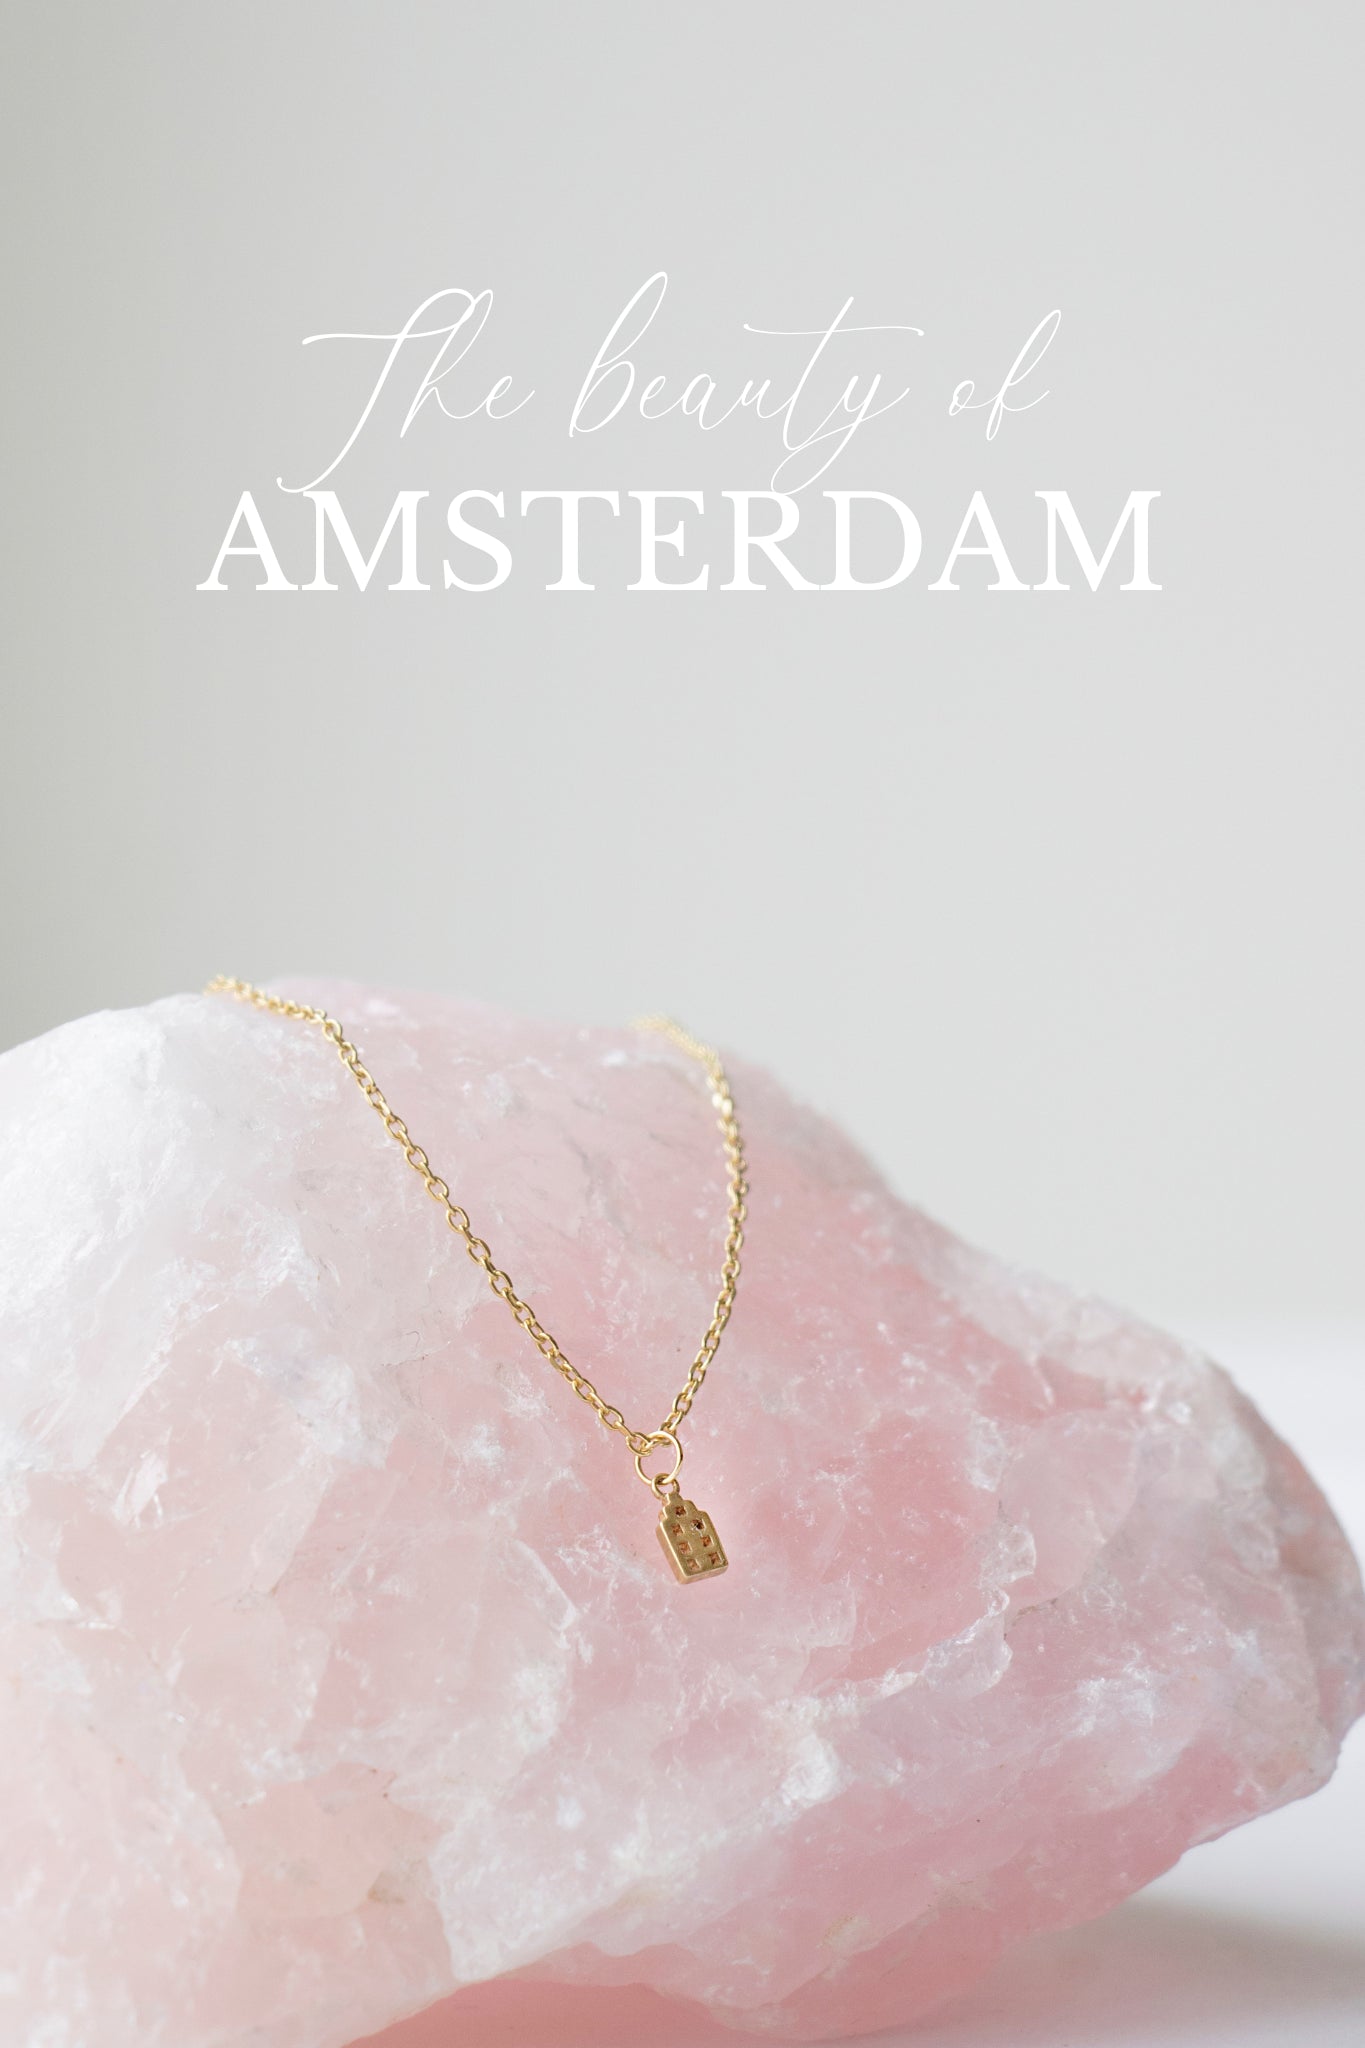 Amsterdam Jordaan Necklace Gold Plated